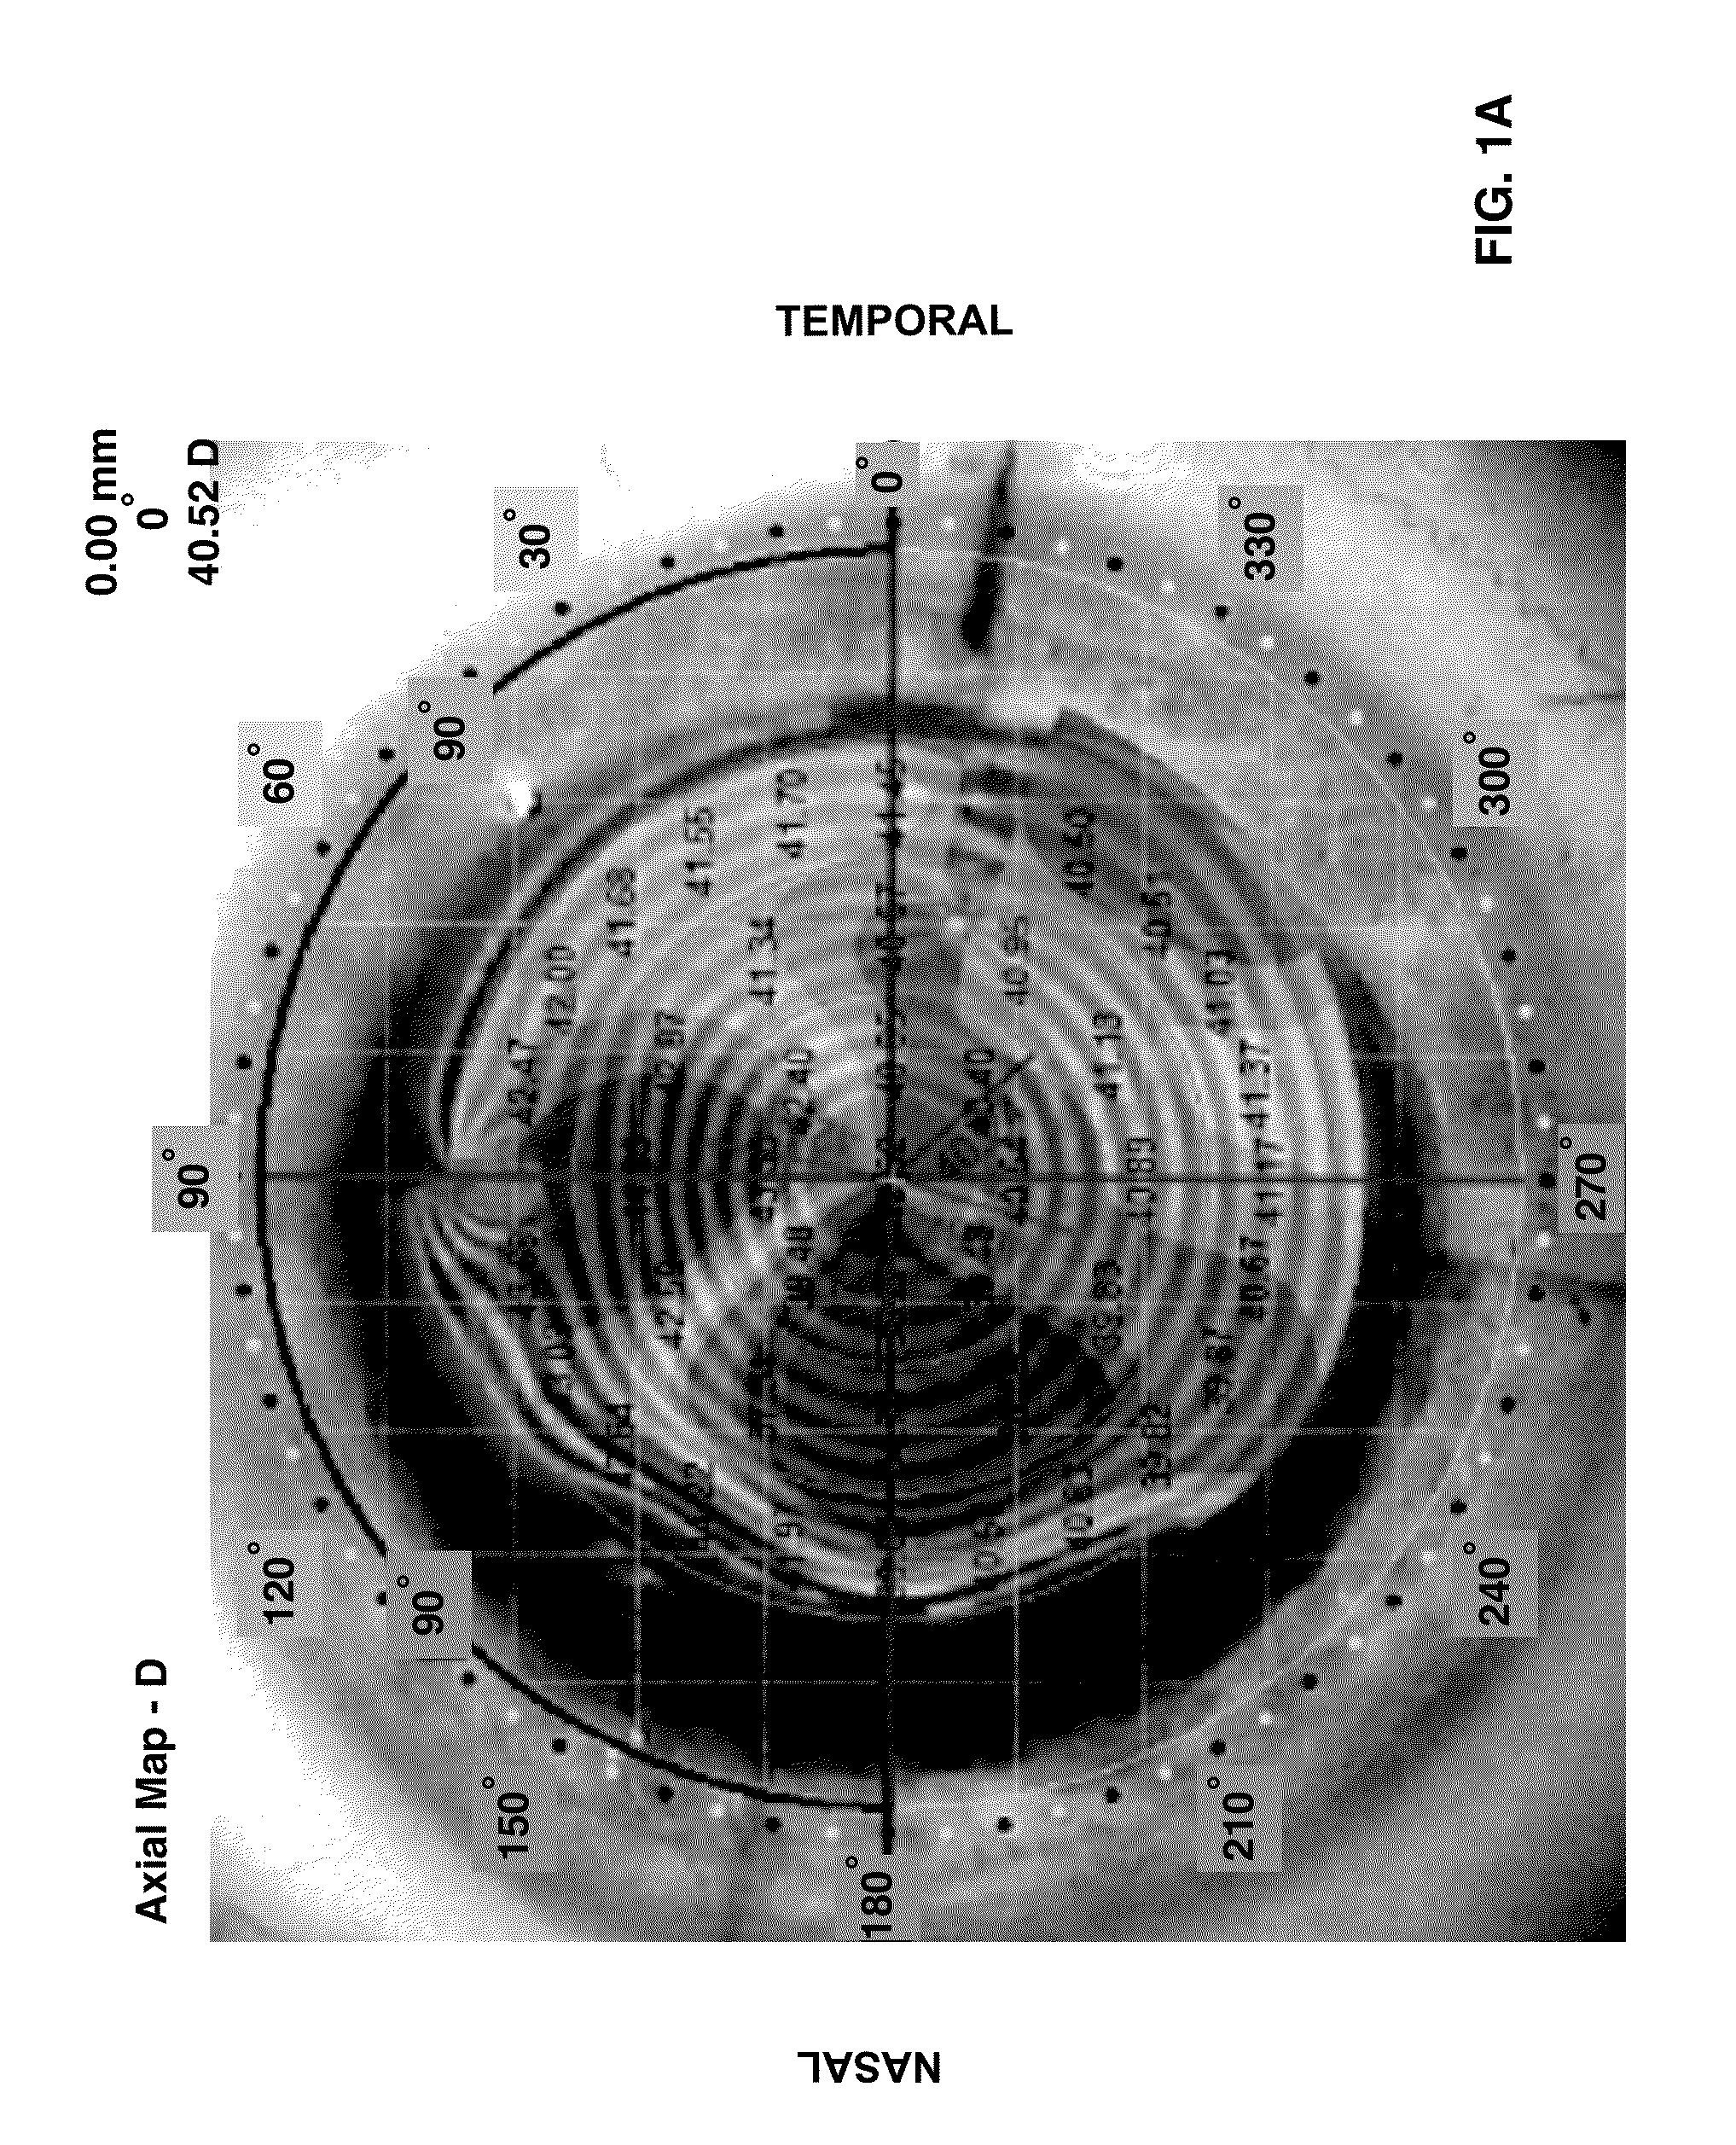 Tools and methods for the surgical placement of intraocular implants